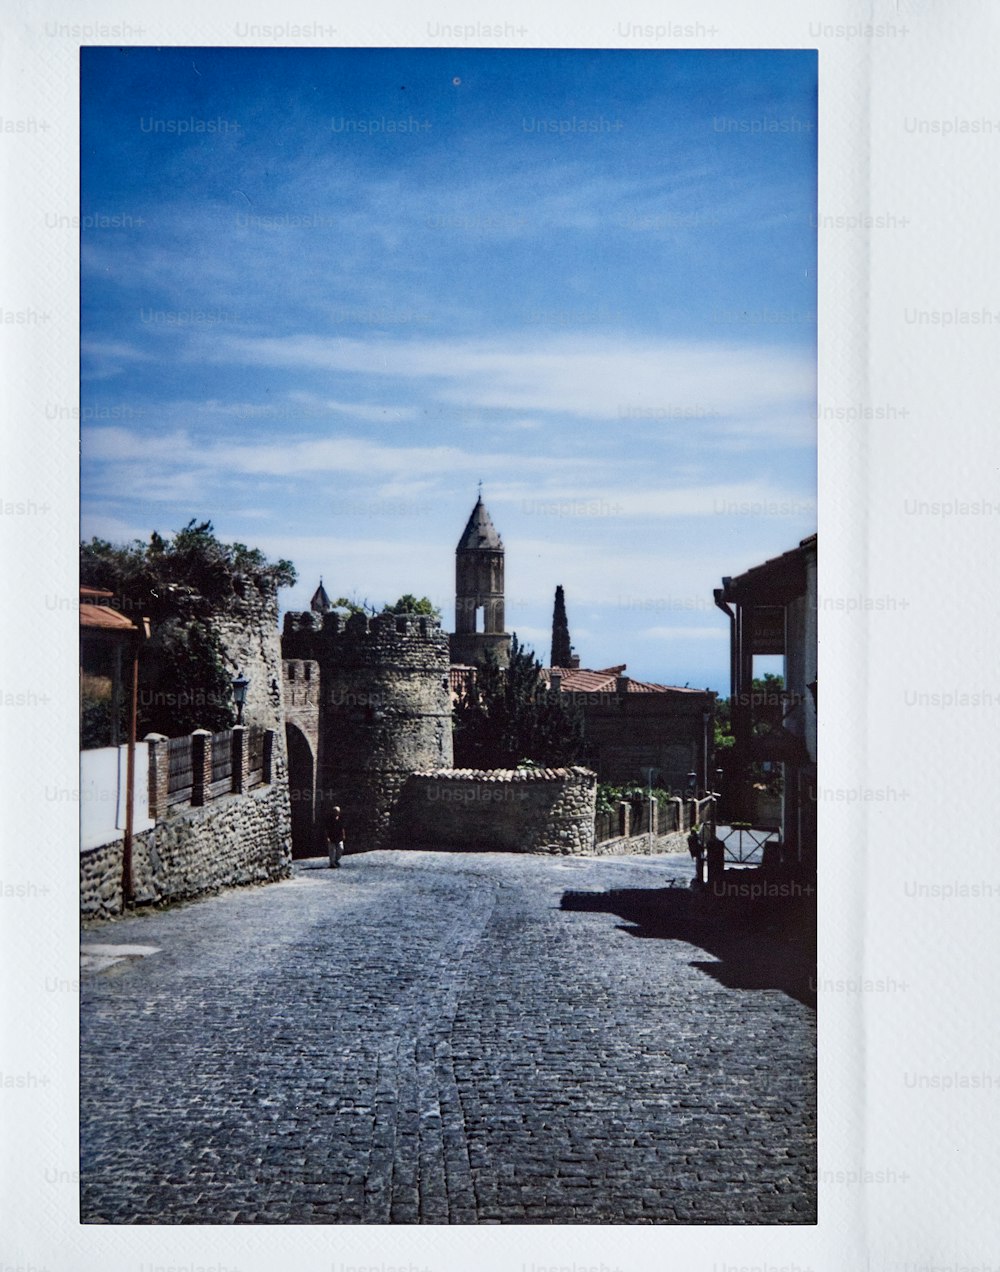 a picture of a cobblestone street with a clock tower in the background